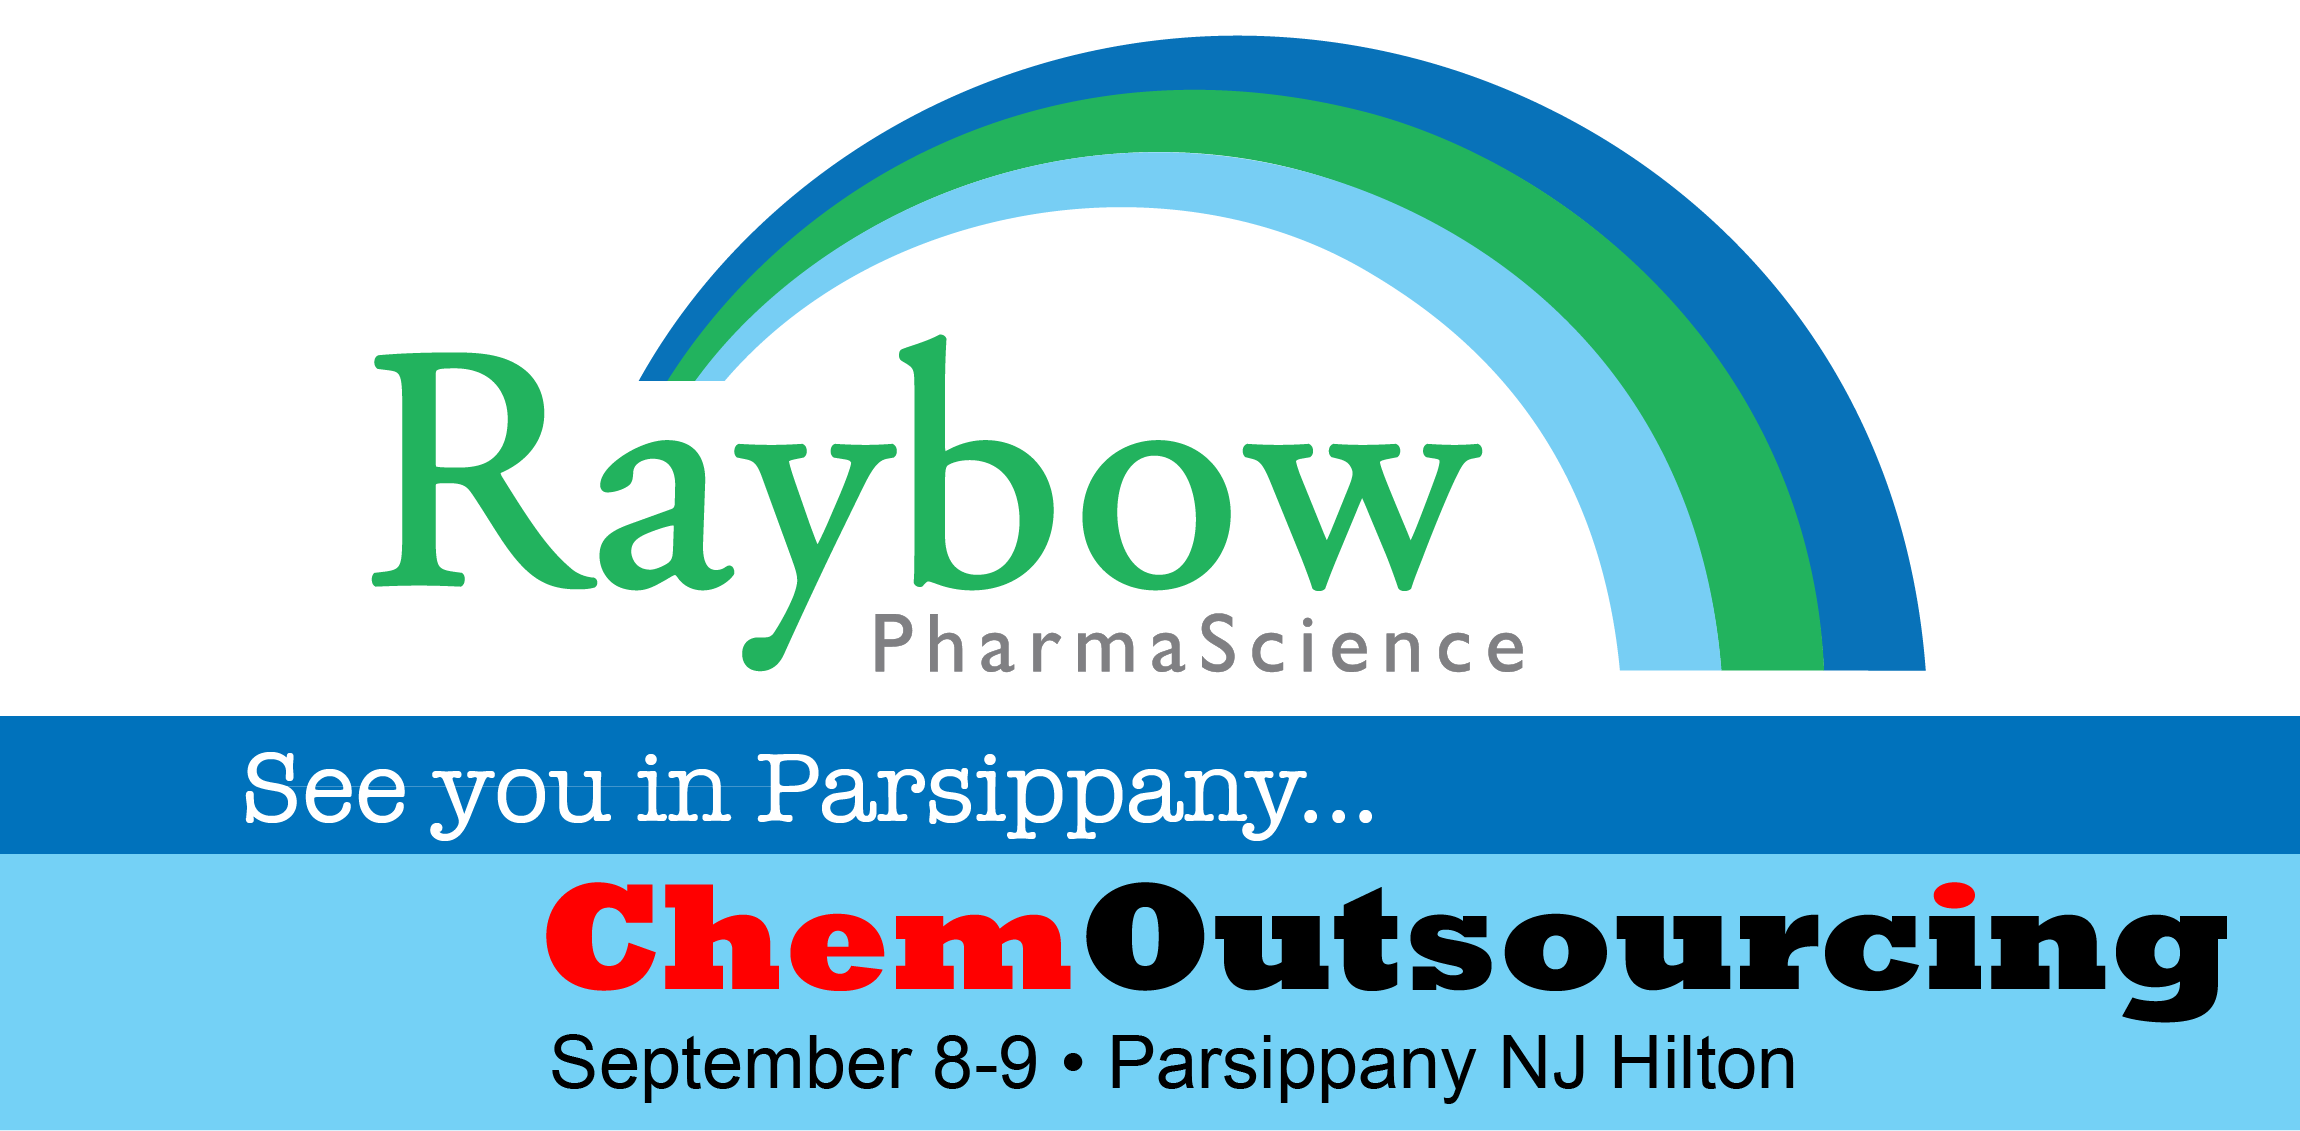 Raybow PharmaScience attending Chemoutsourcing in Parsippany, New Jersey Image